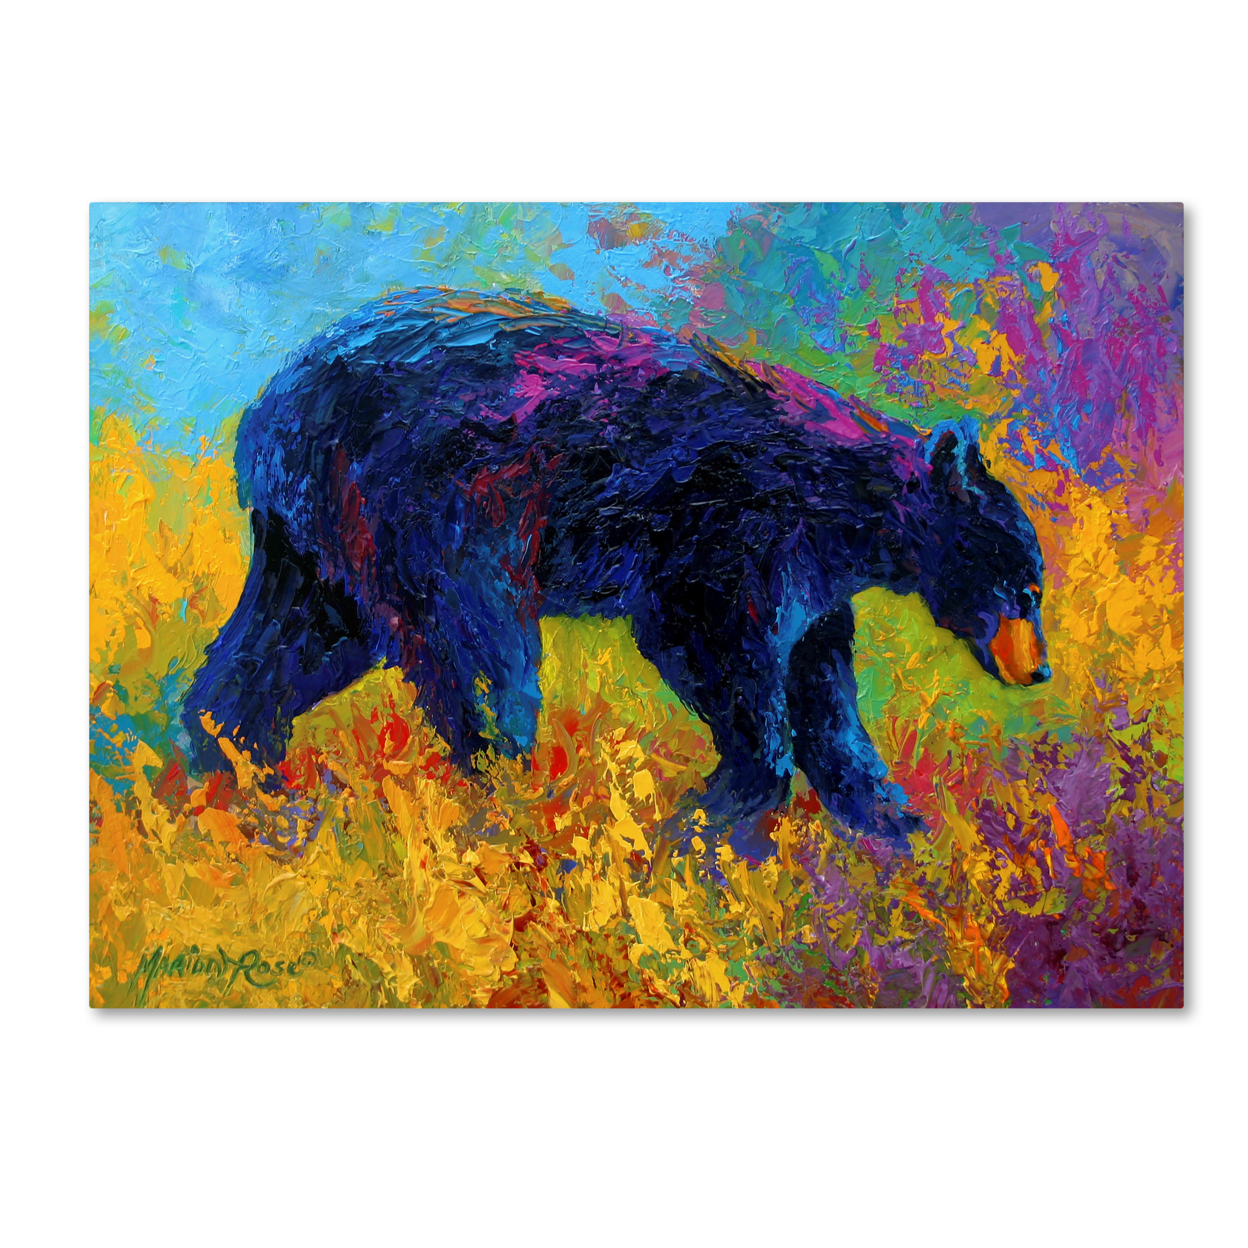 Marion Rose 'Young Restless II Black Bear Big' Ready To Hang Canvas Art 18 X 24 Inches Made In USA